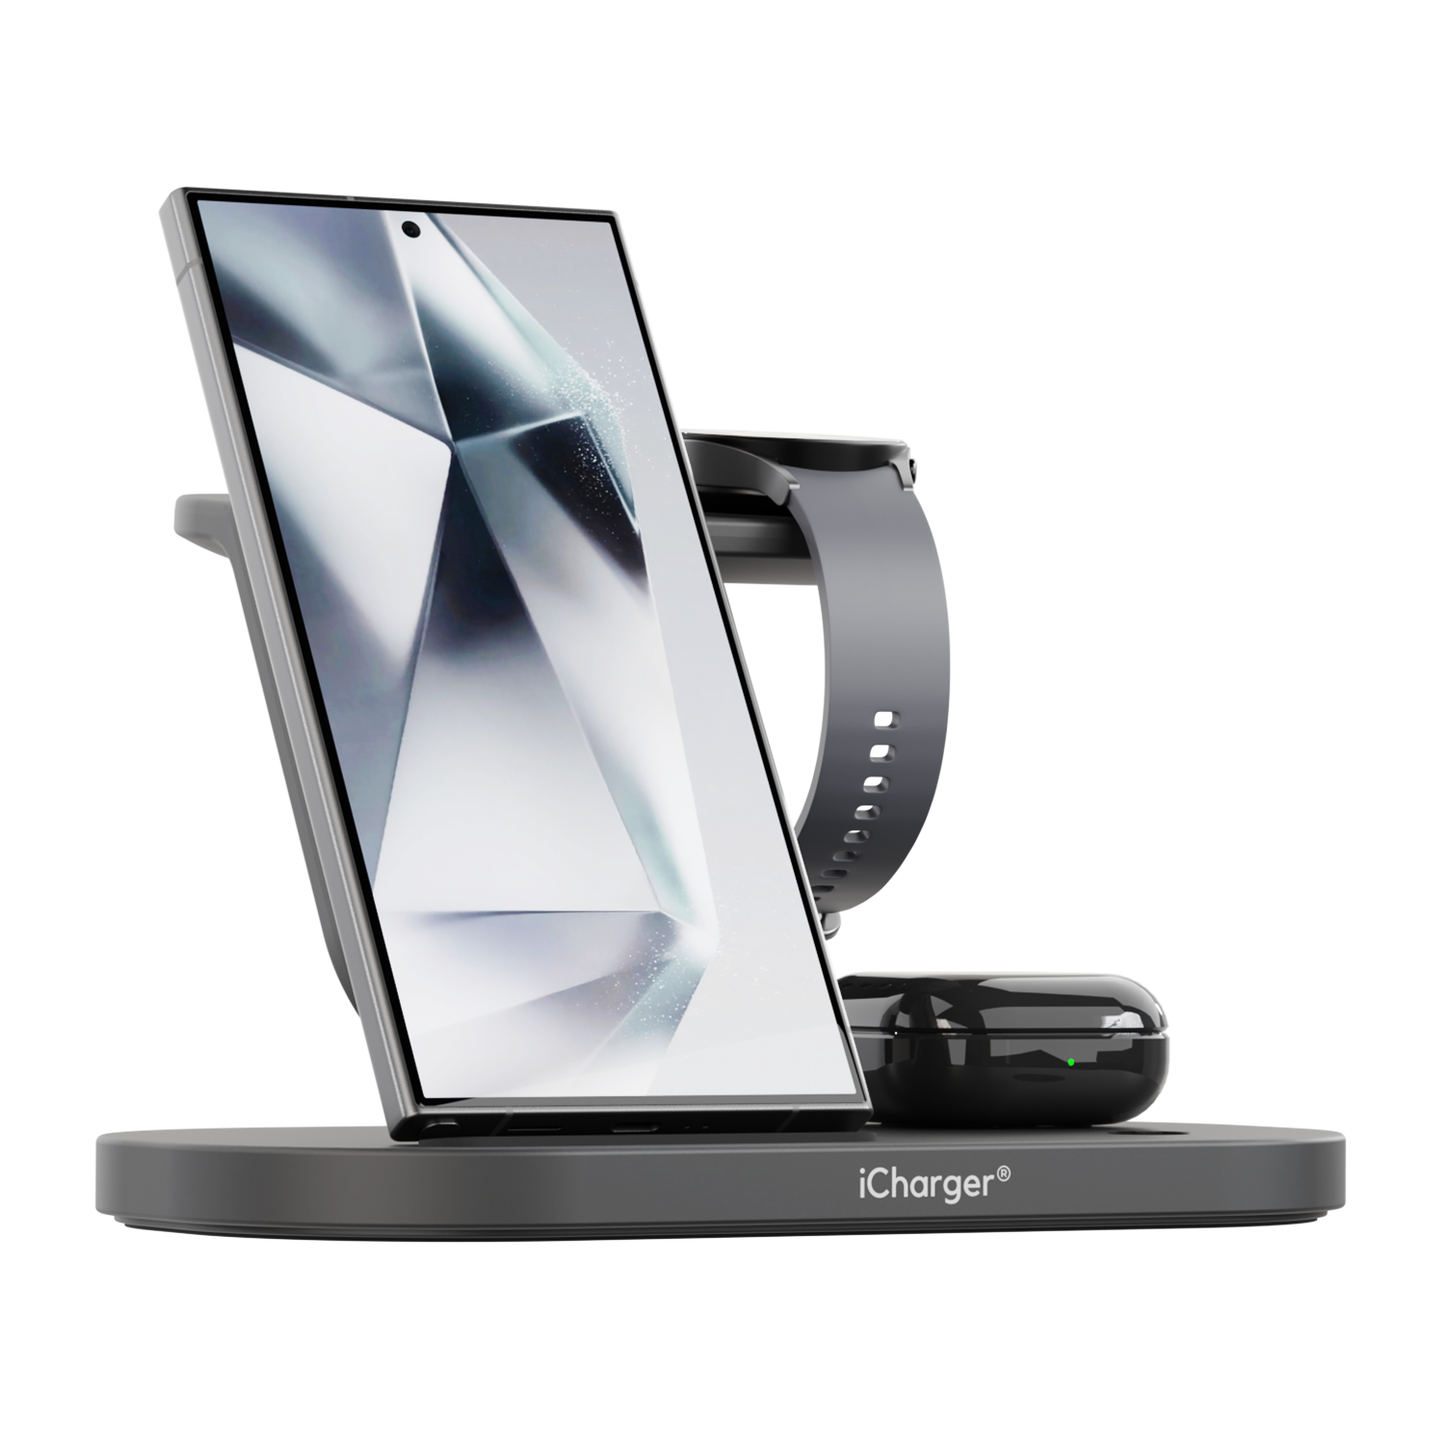 iCharger Samsung Pro Edition showcasing a smartphone at 32% battery on the wireless charger with a smartwatch and earbuds in the background.